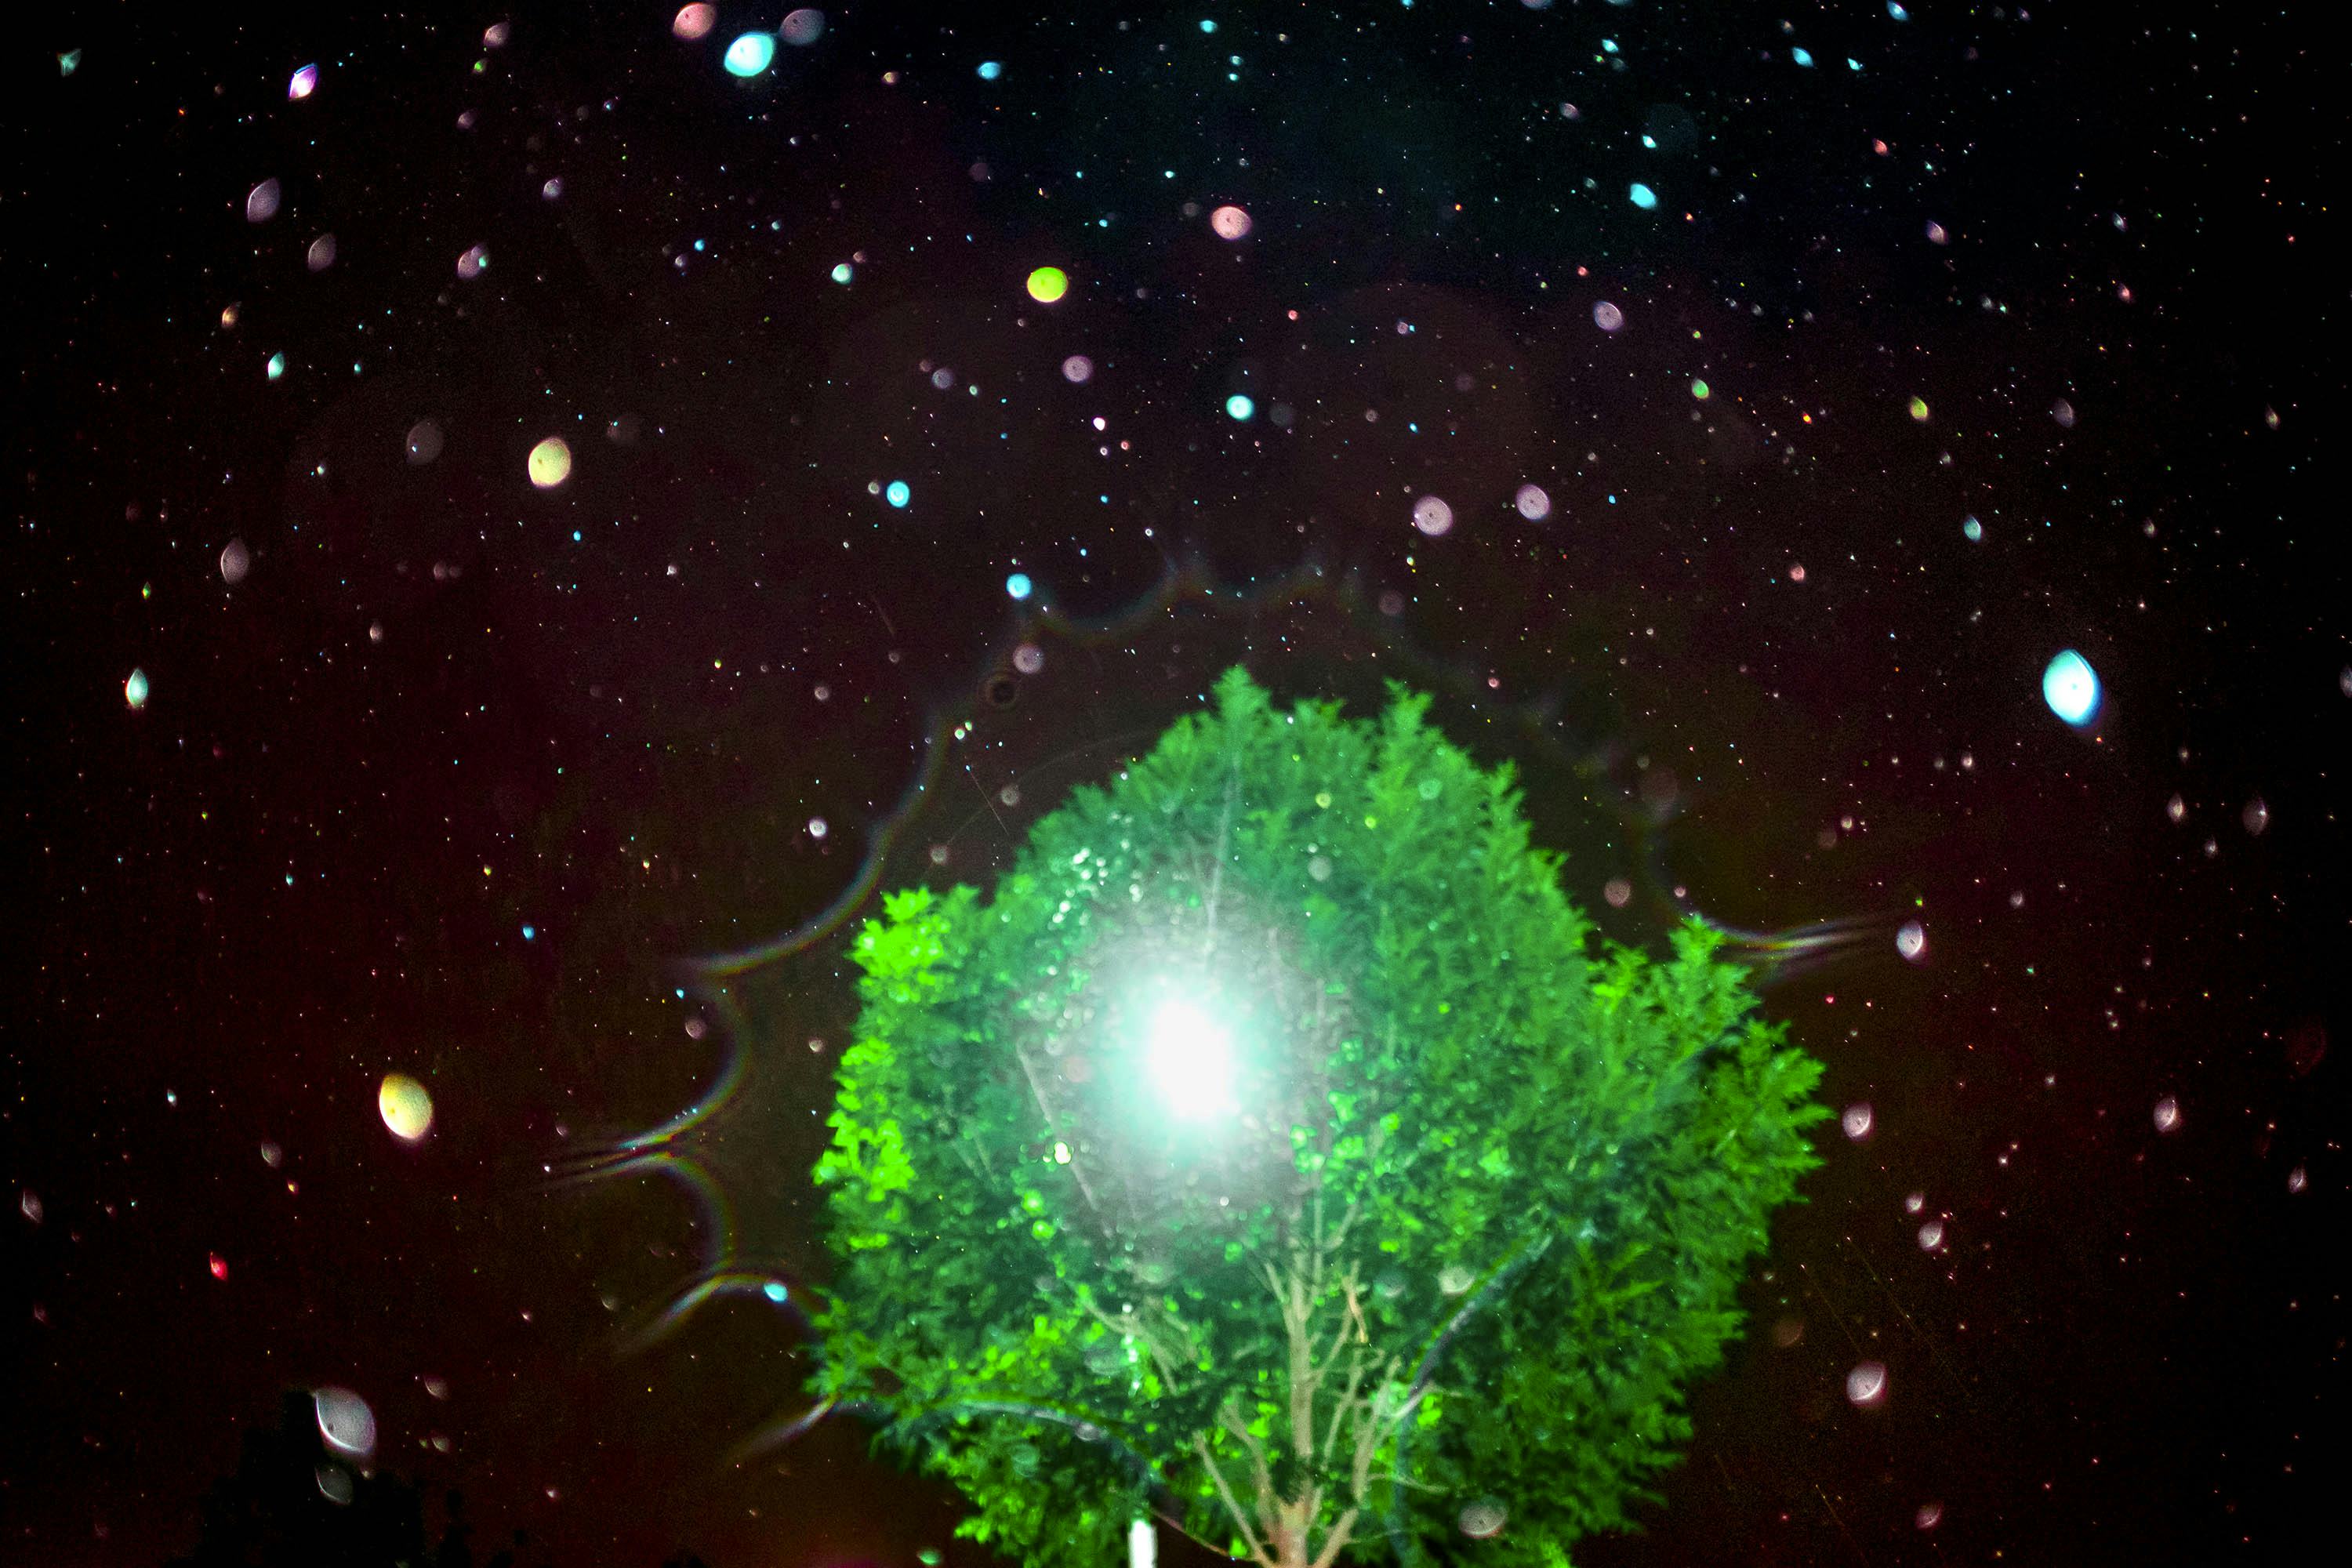 Abstract image of a tree in a night sky, with a bright flash © Oğulcan Arslan